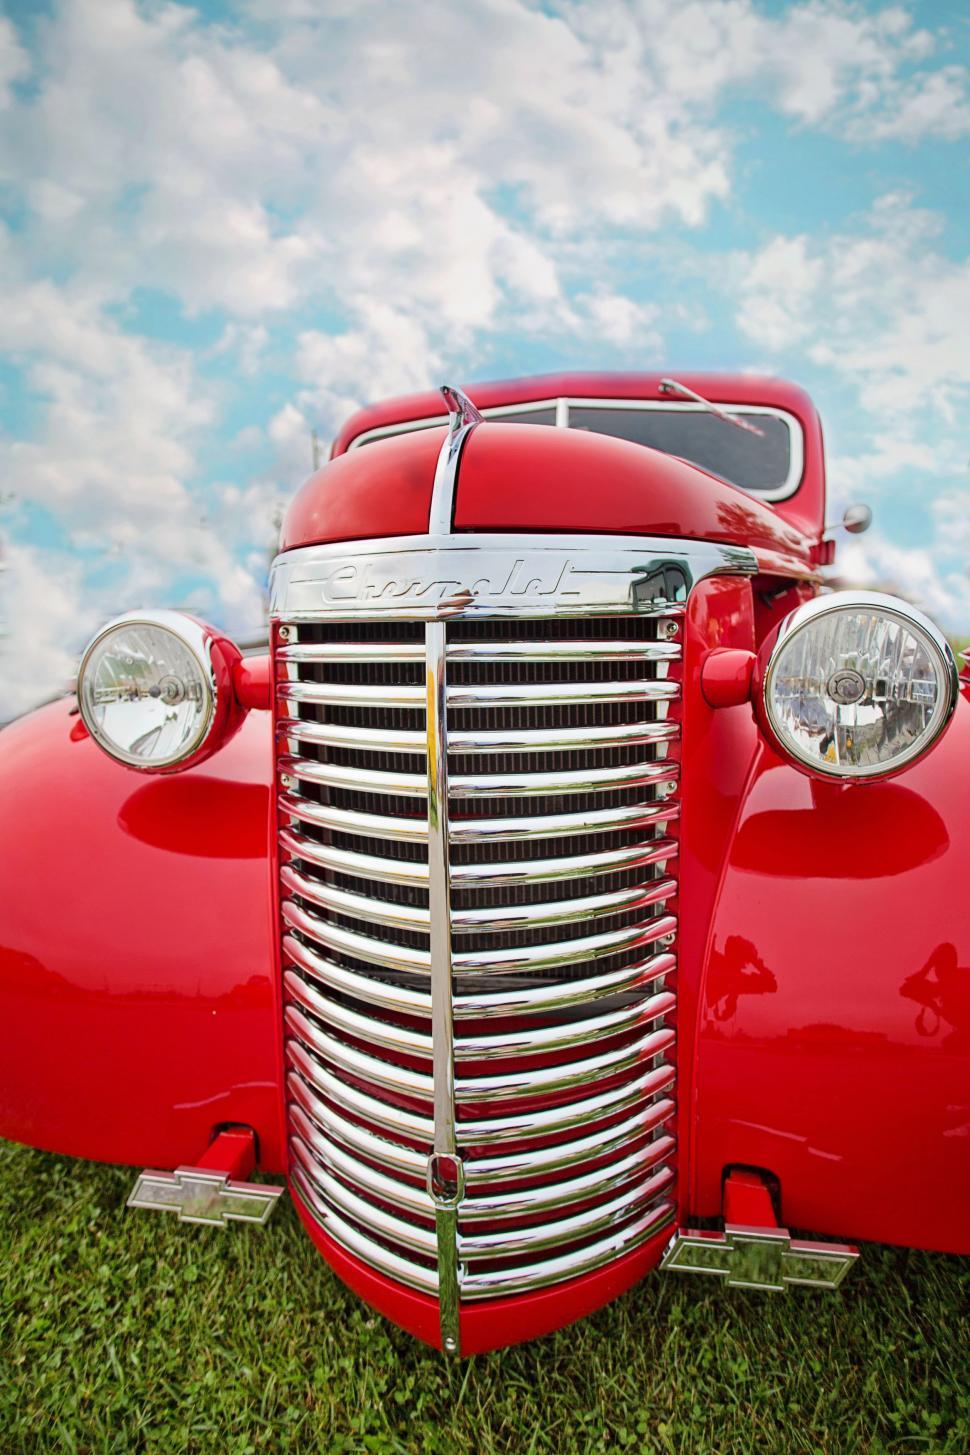 Free Image of Vintage Car on green grass 